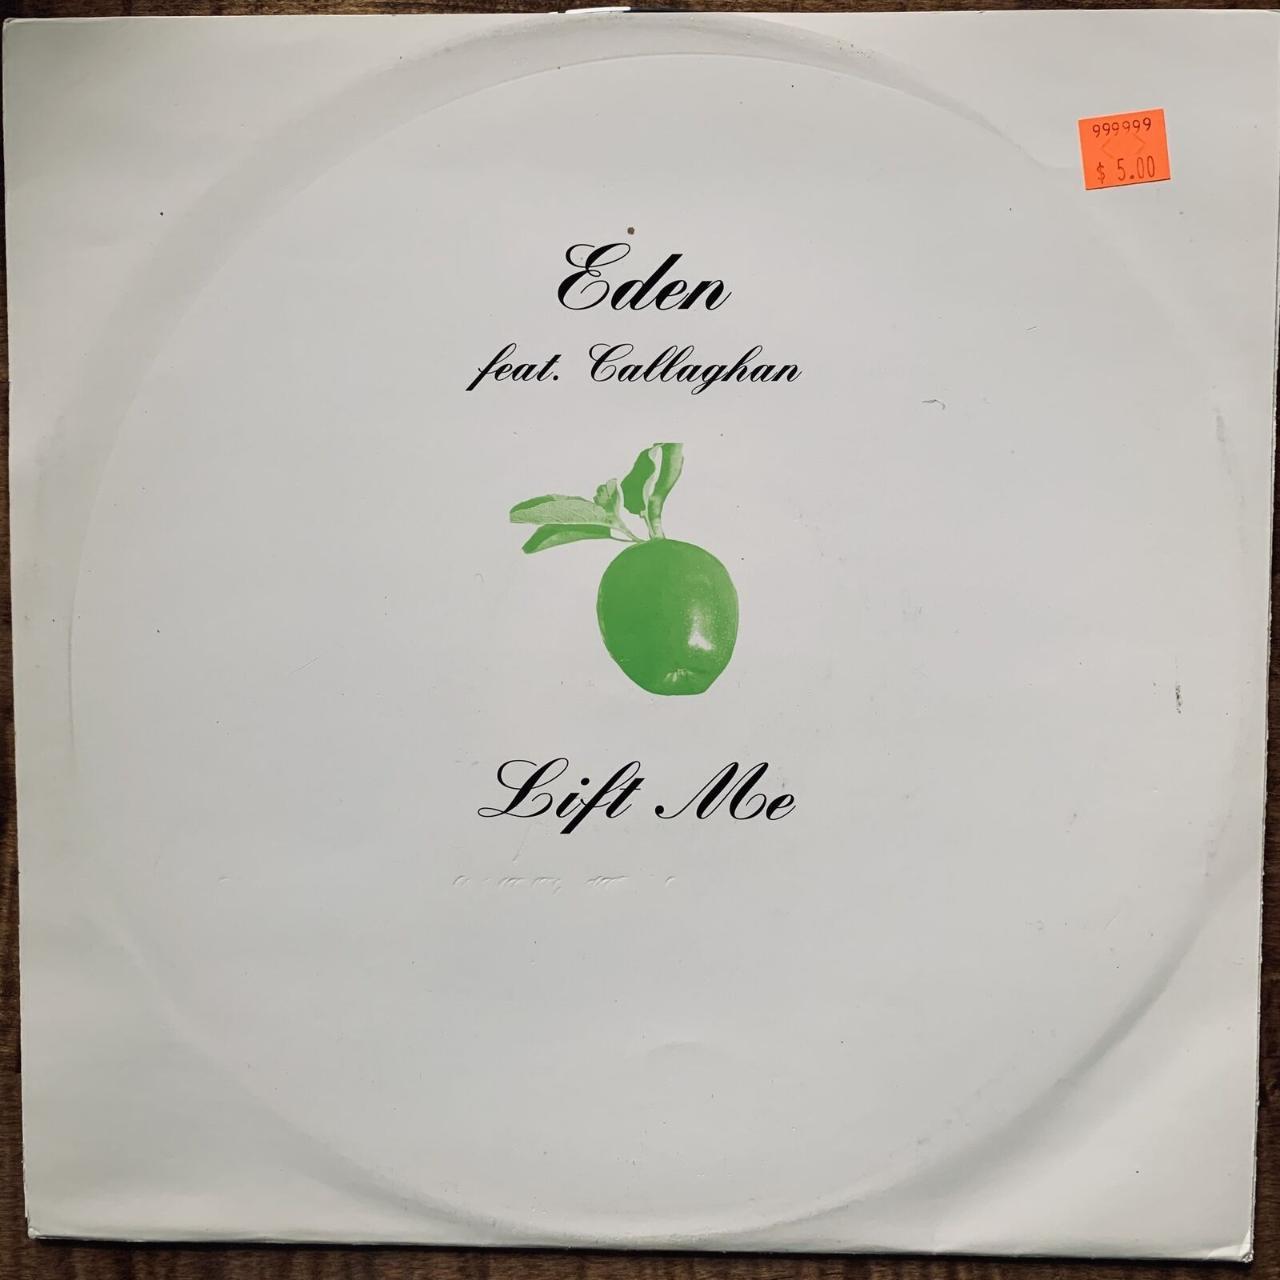 Product Image 1 - EDEN FEAT. CALLAGHAN LIFT ME